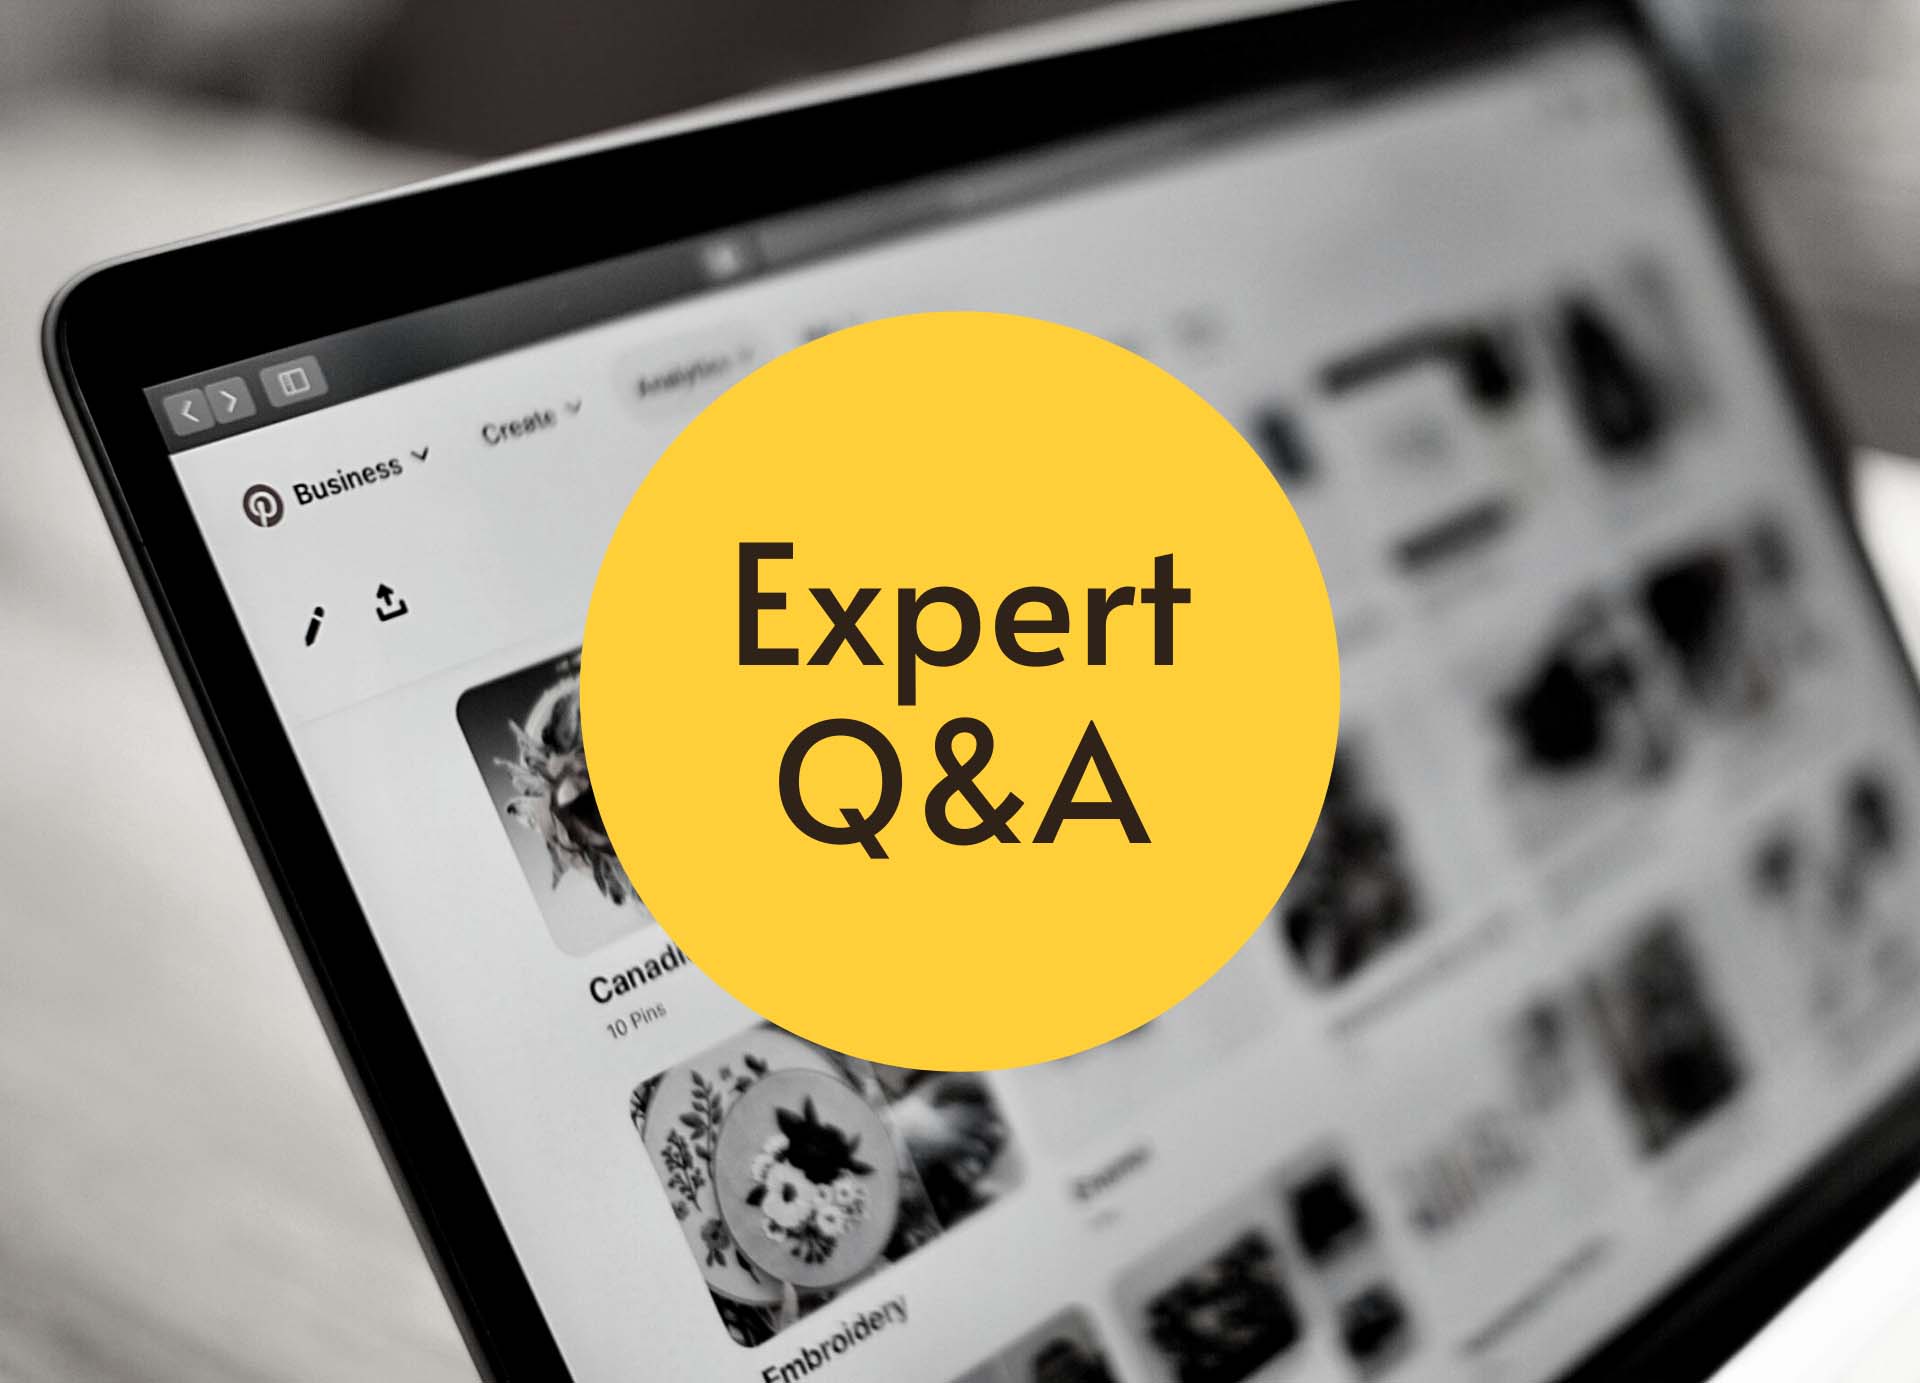 Black and white image of computer screen showing the Pinterest website. A yellow circle atop it reads " Expert Q&A"